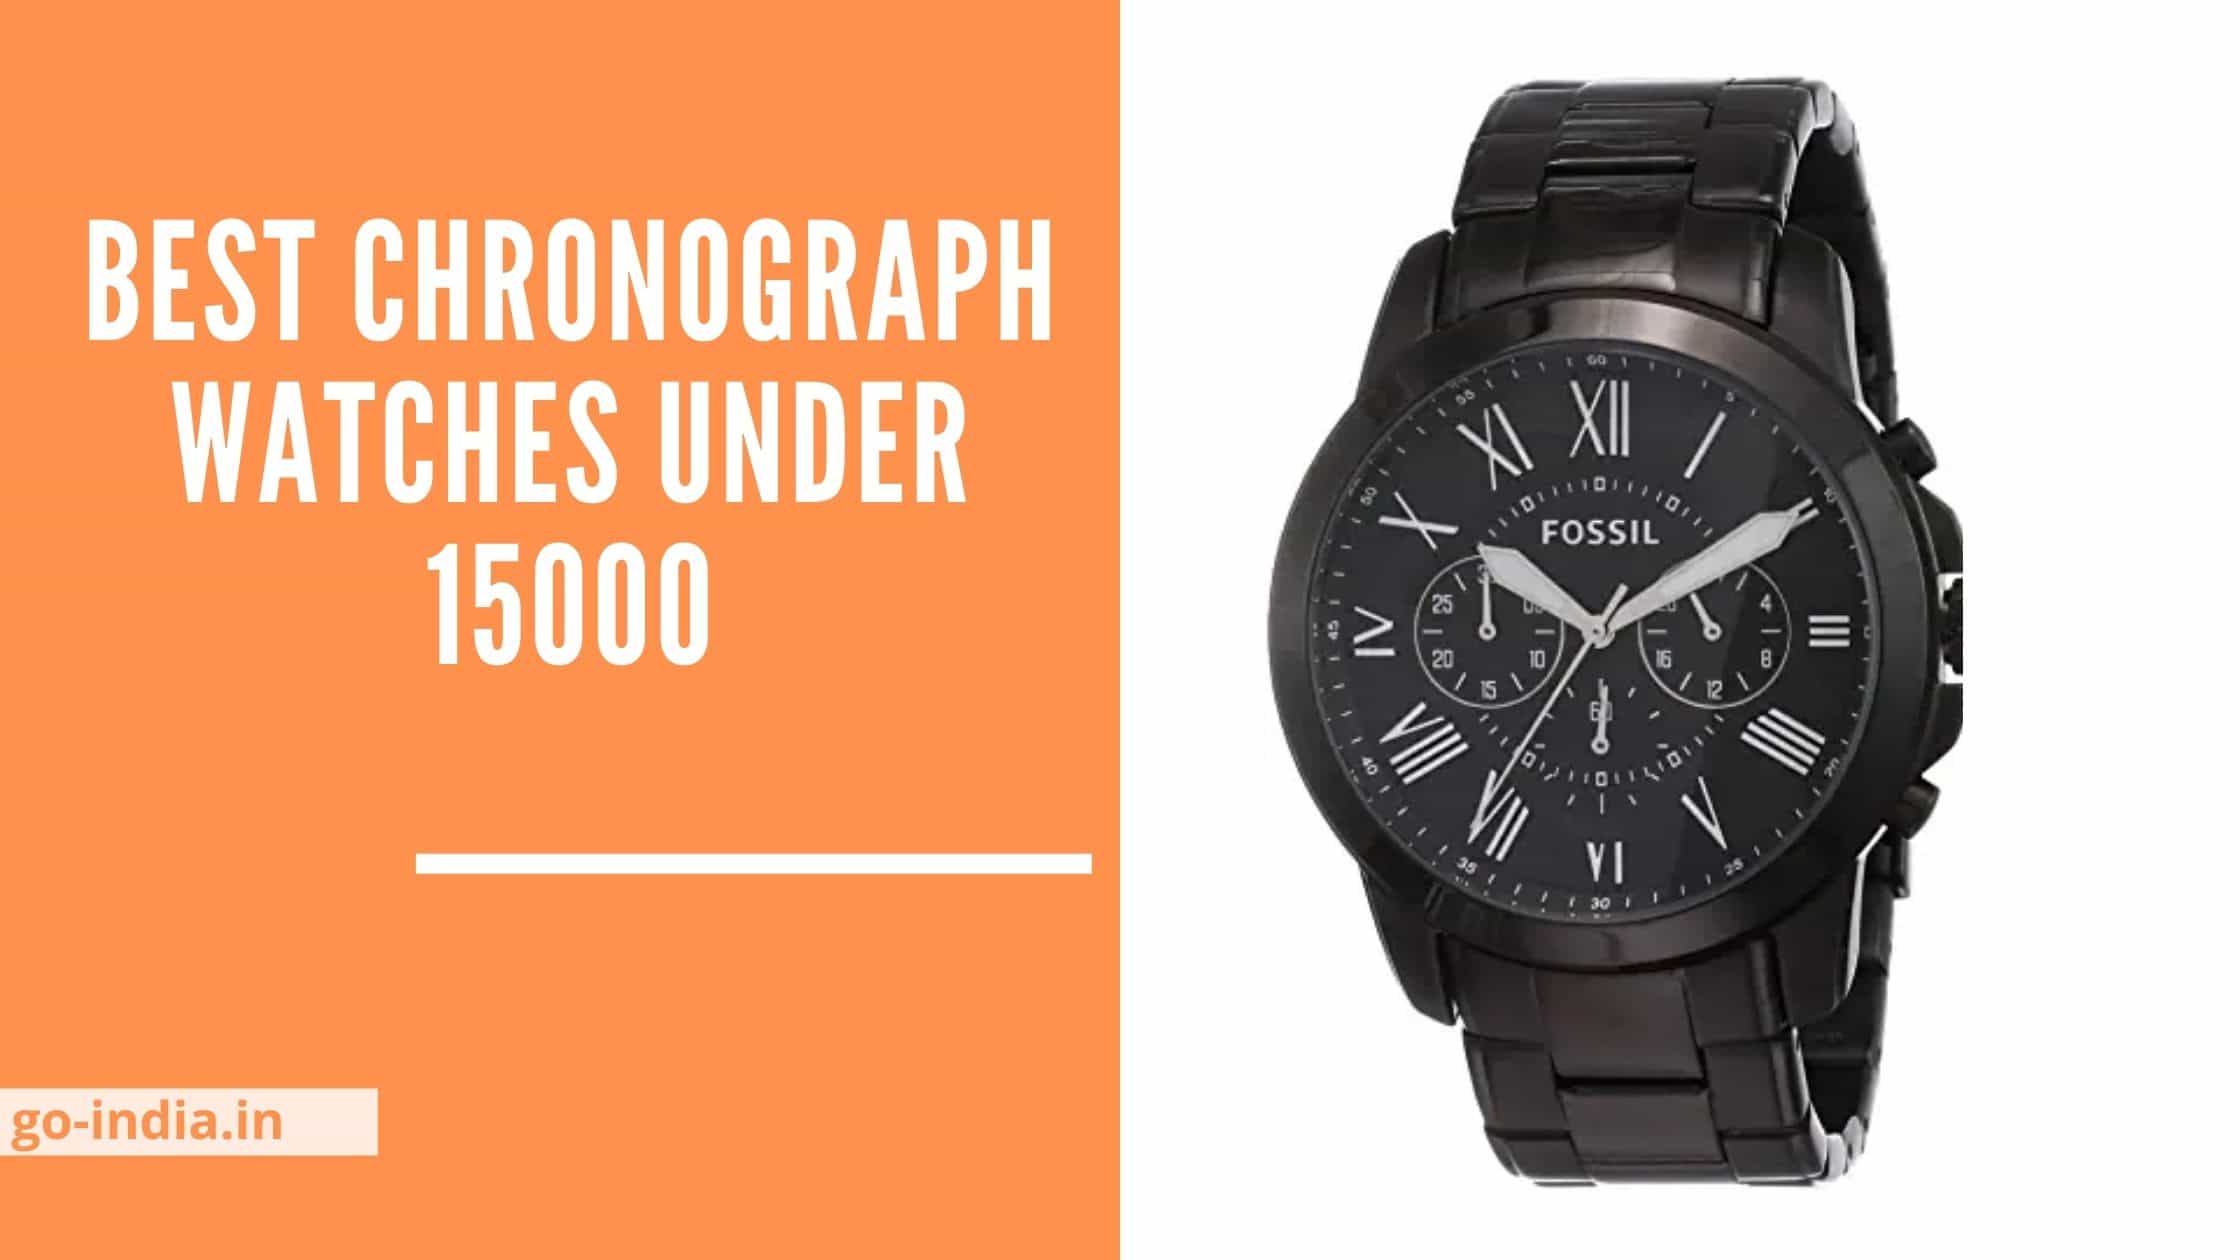 Top 10 Best Chronograph Watches Under 15000 in India 2022